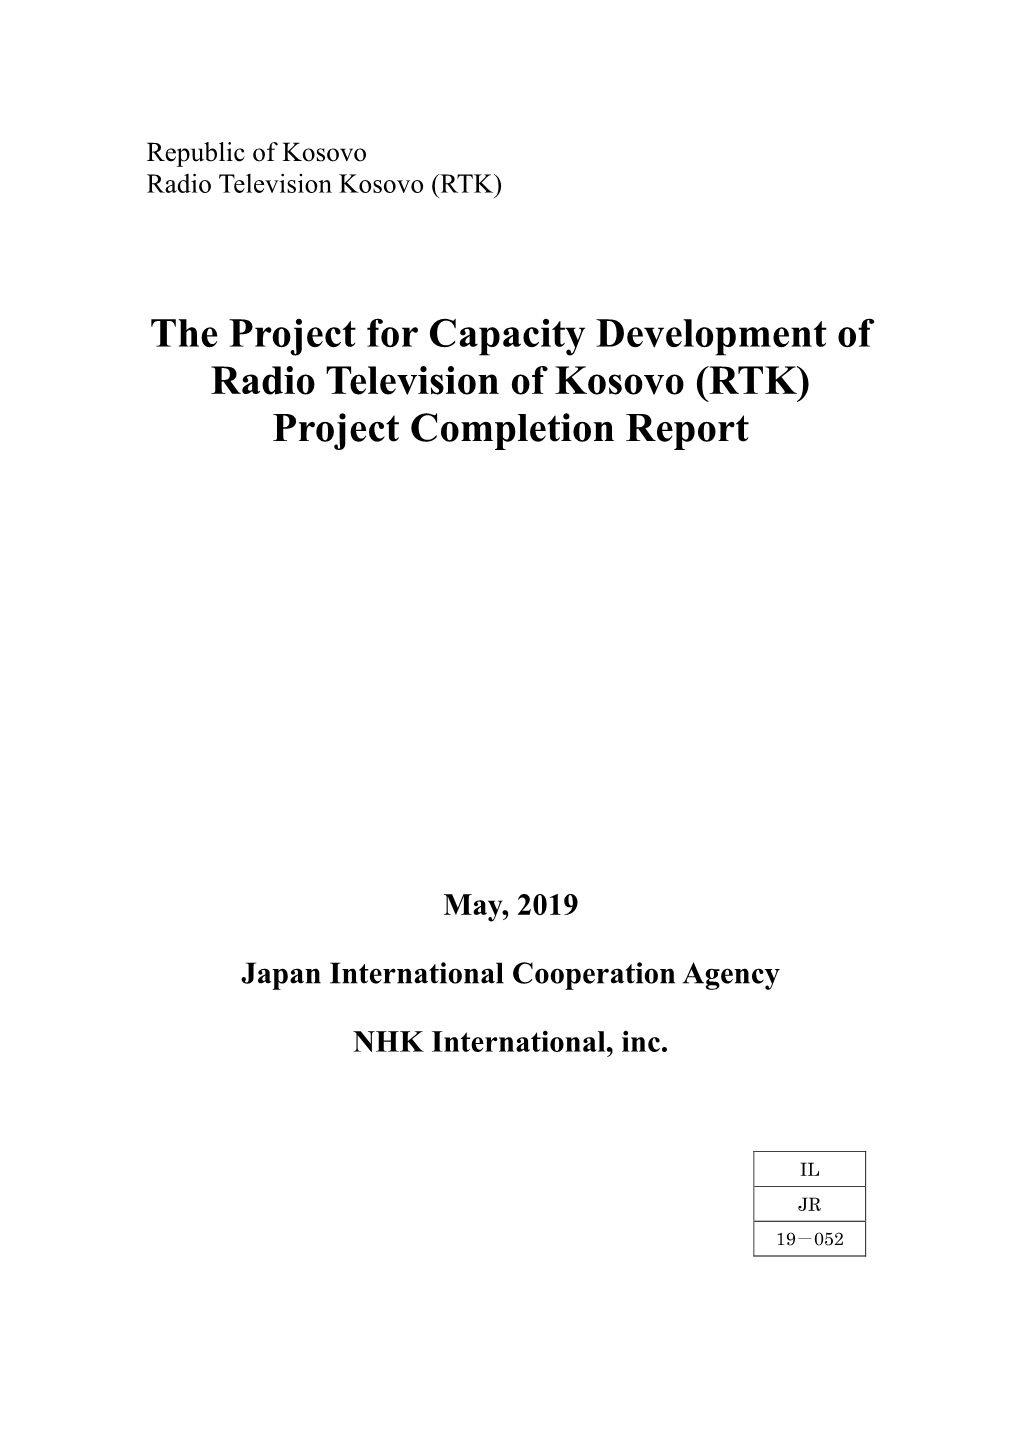 The Project for Capacity Development of Radio Television of Kosovo (RTK) Project Completion Report